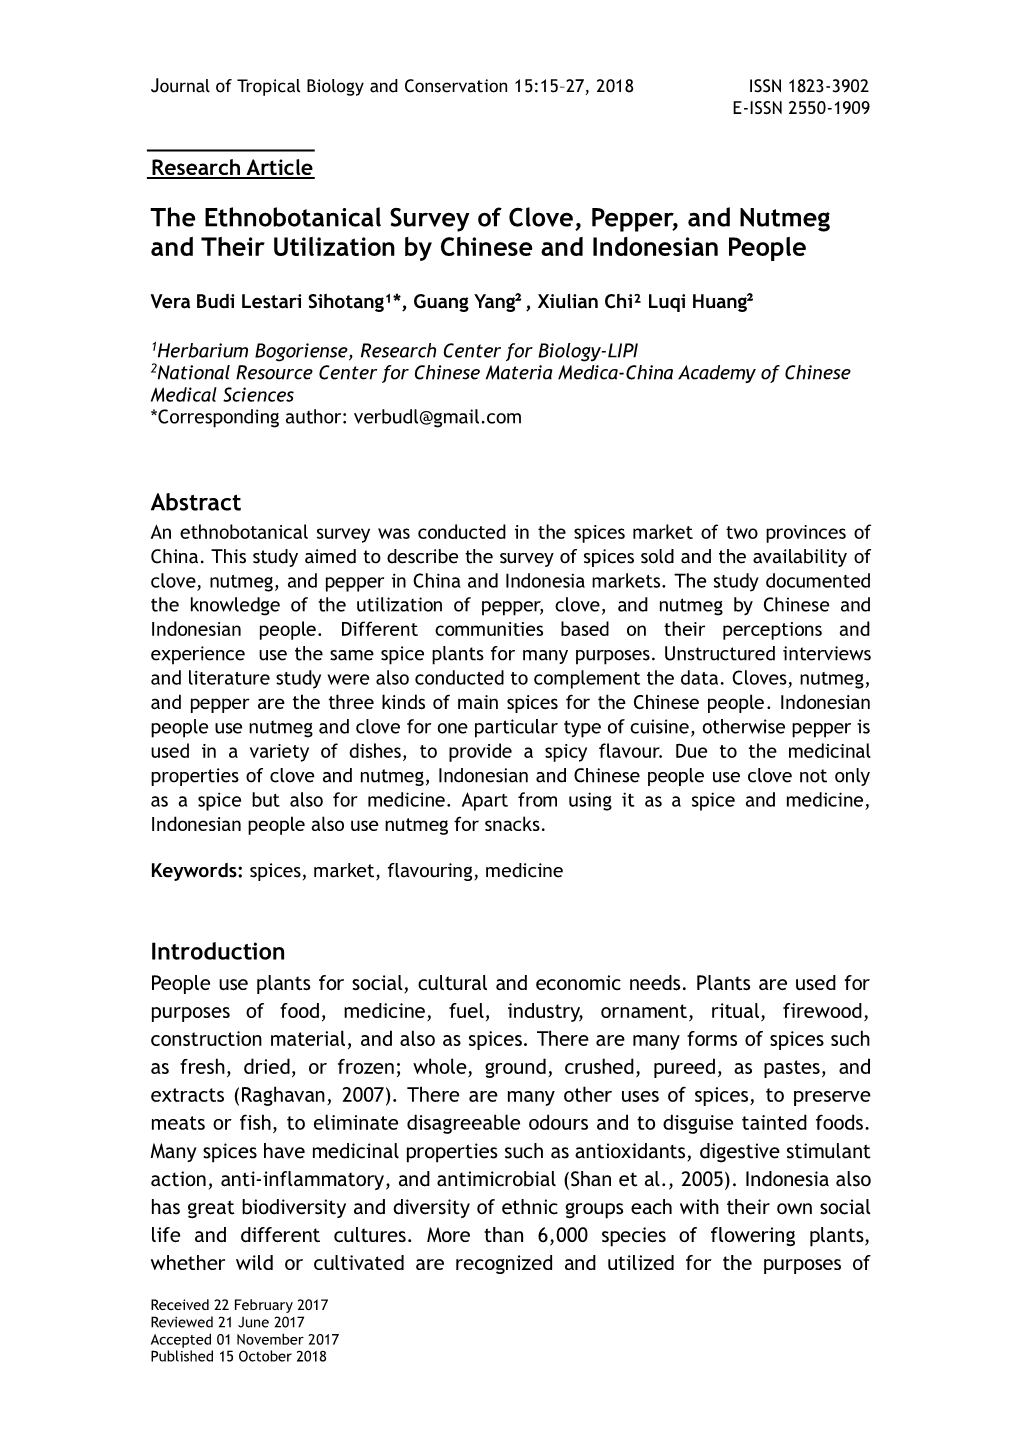 The Ethnobotanical Survey of Clove, Pepper, and Nutmeg and Their Utilization by Chinese and Indonesian People